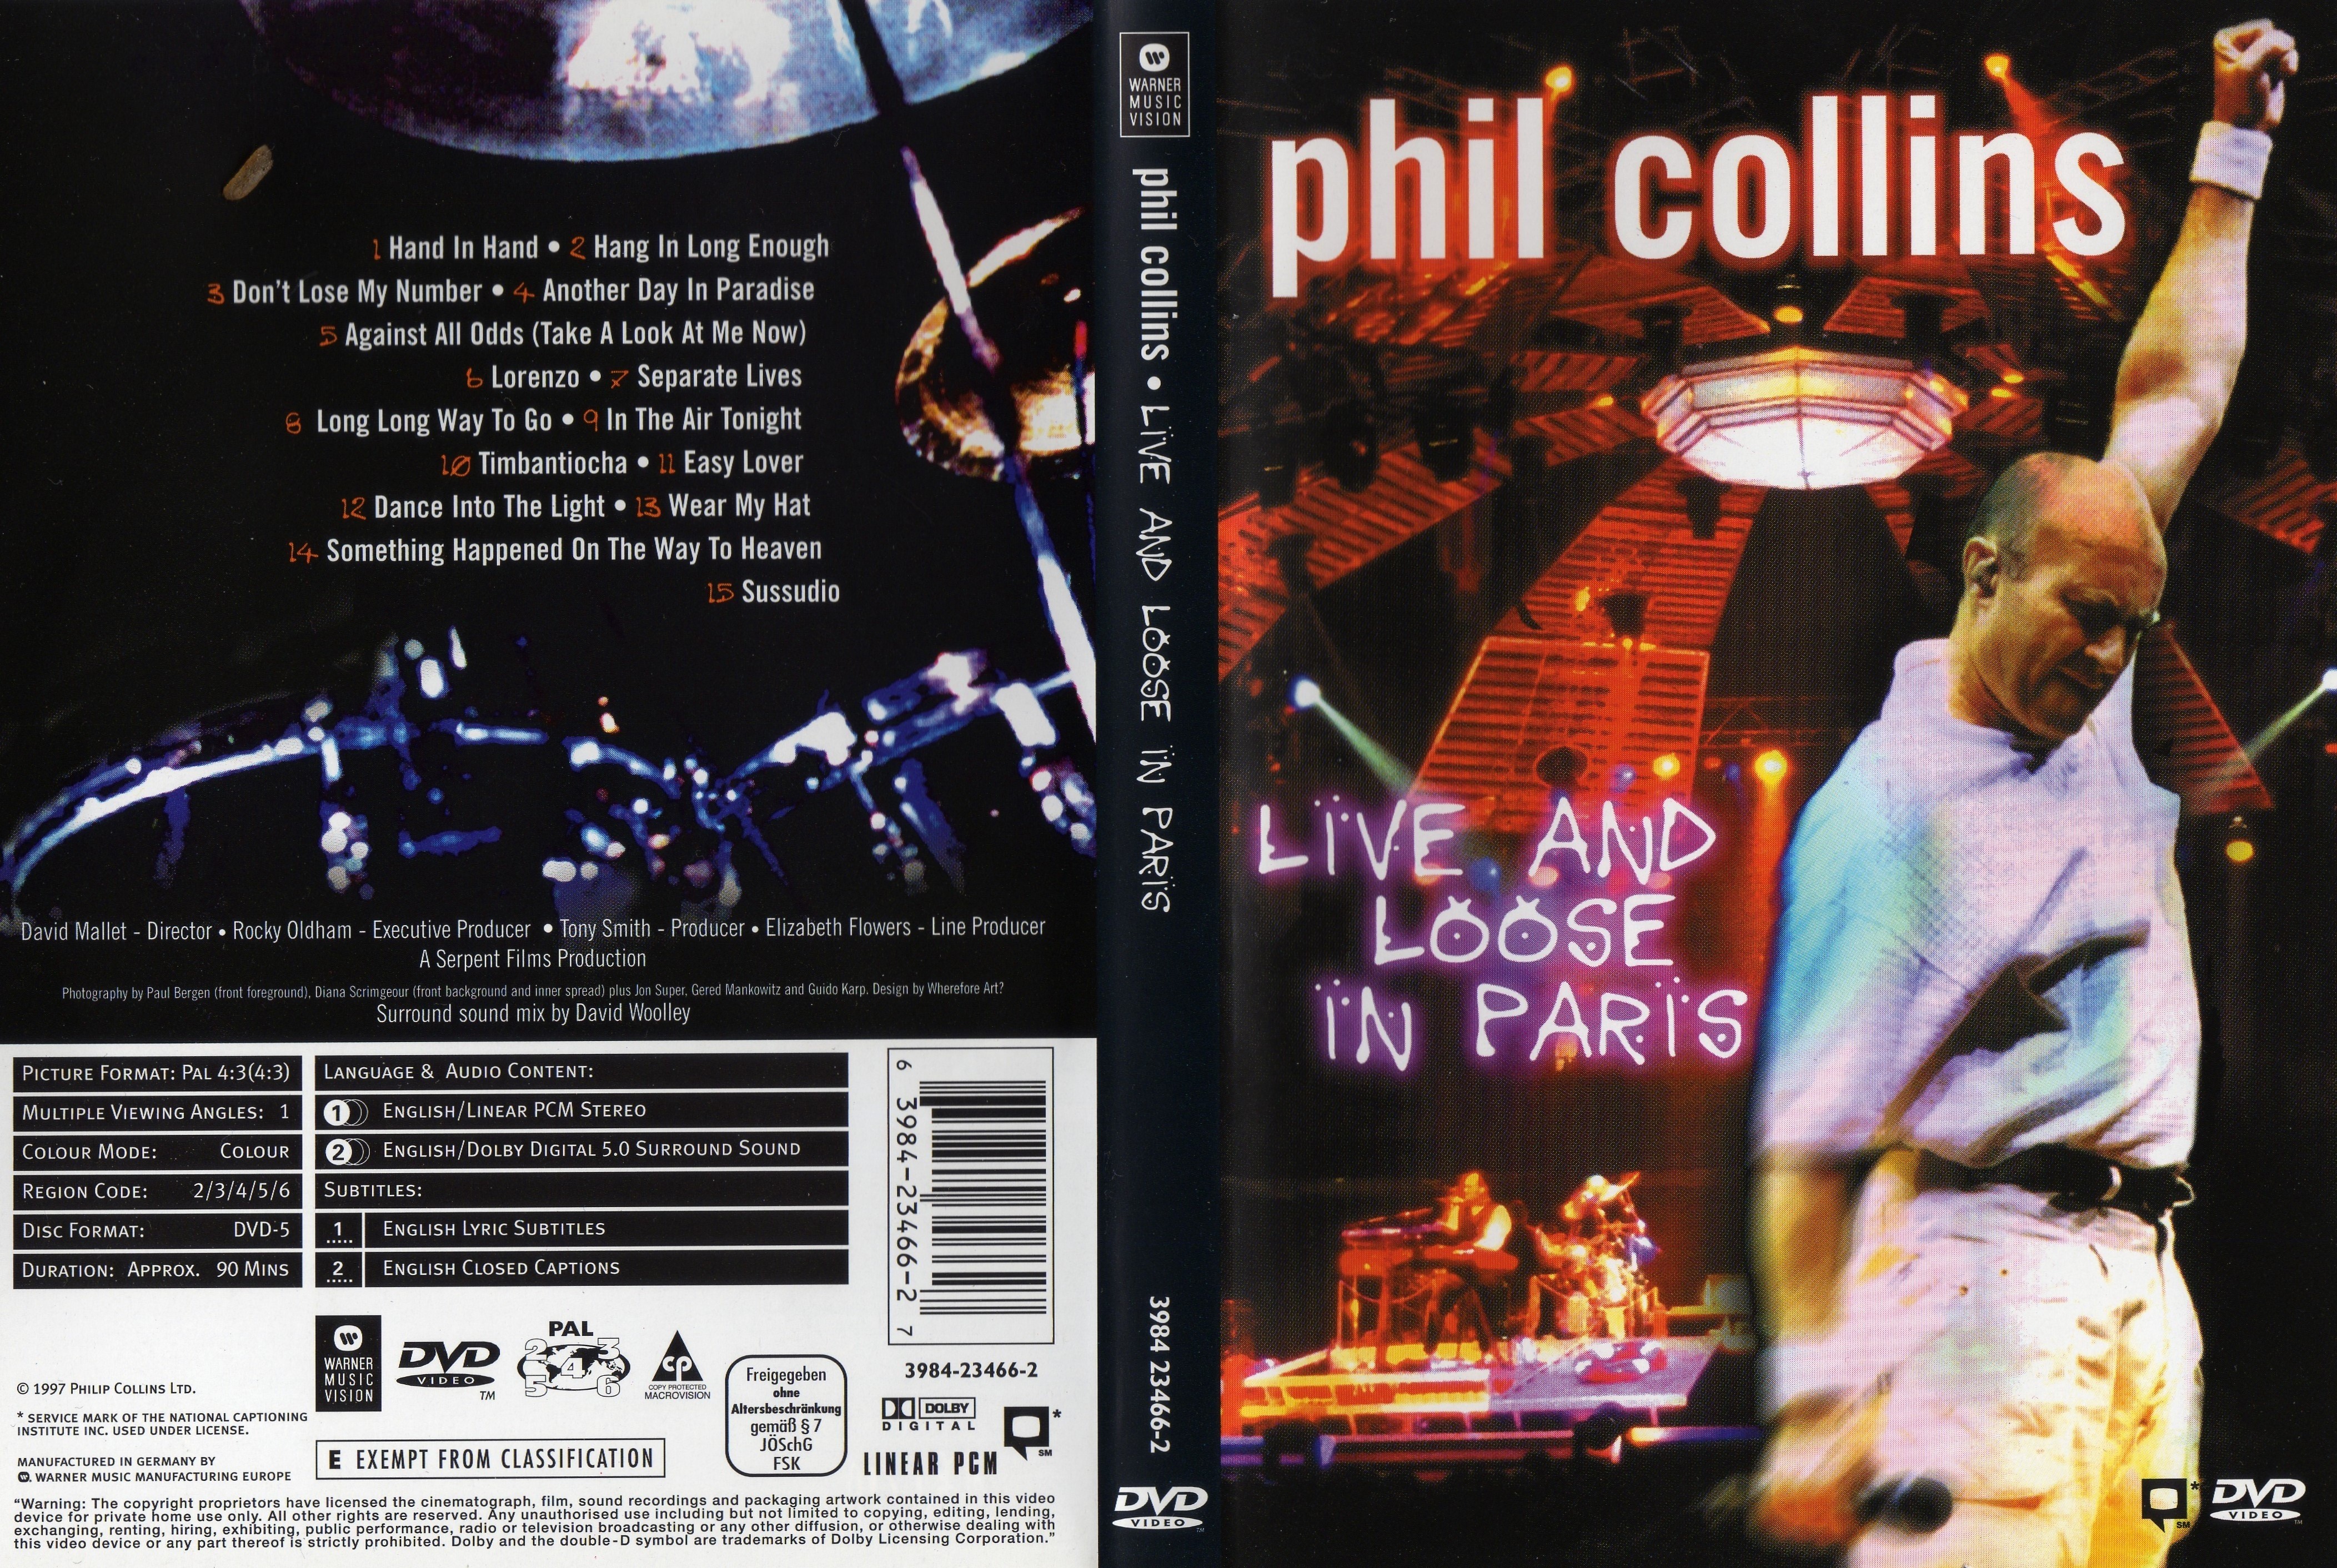 Jaquette DVD Phil Collins Live and loose in Paris